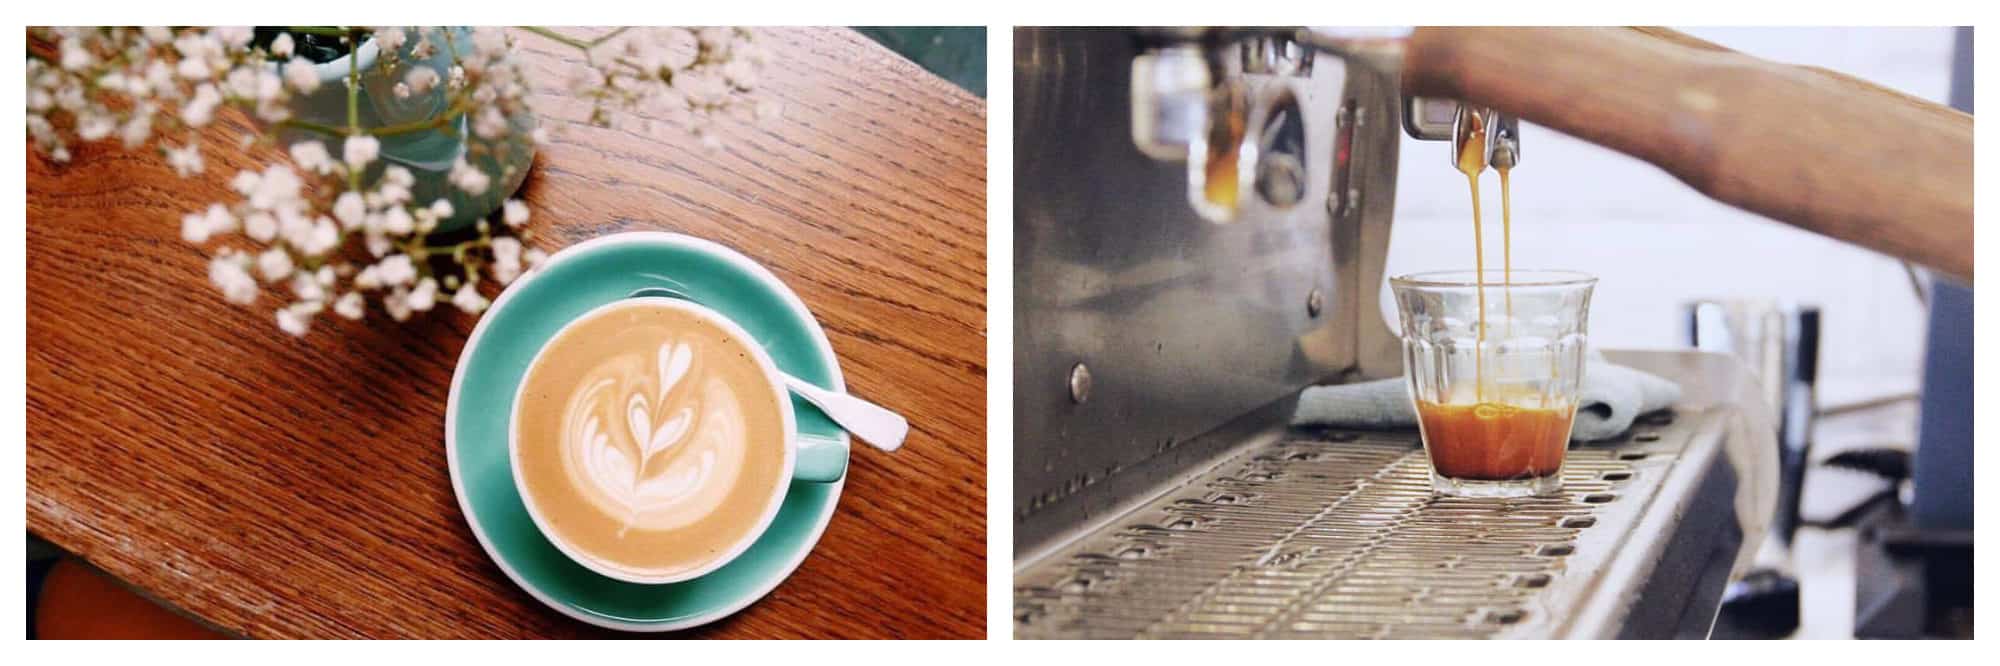 Alternative co-working spaces in Paris include 5 Pailles, which does pretty lattés in turquoise ceramanic cups (left) and is known for having a good barista (right).